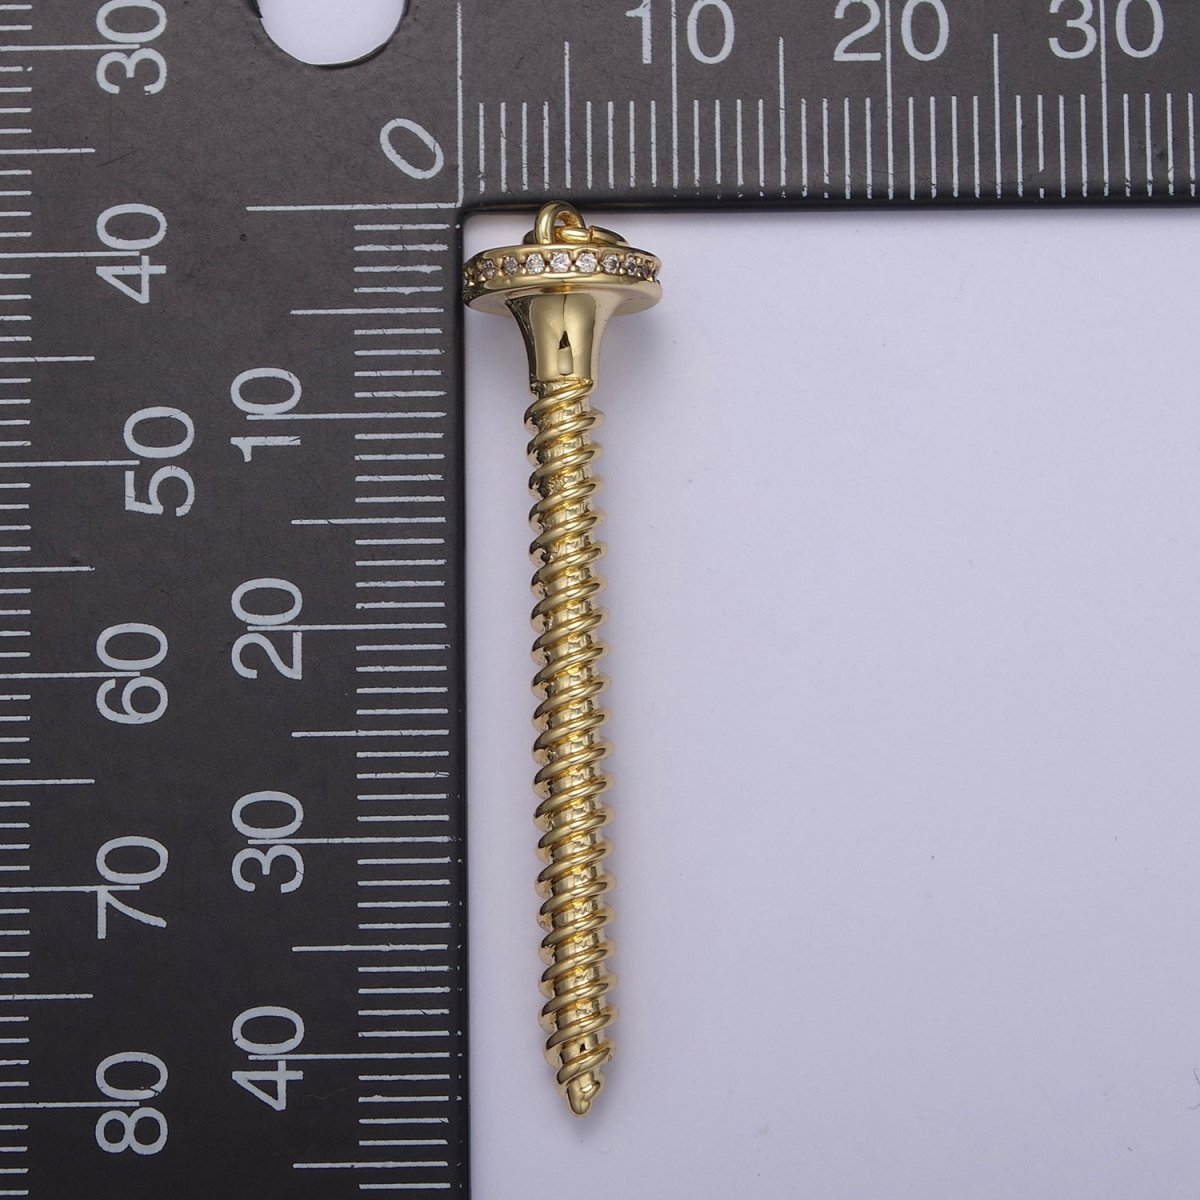 14k Gold Filled Screw Tools Charm Pendant for Necklace Bracelet Jewelry Making Supply N-788 - N-793 - DLUXCA